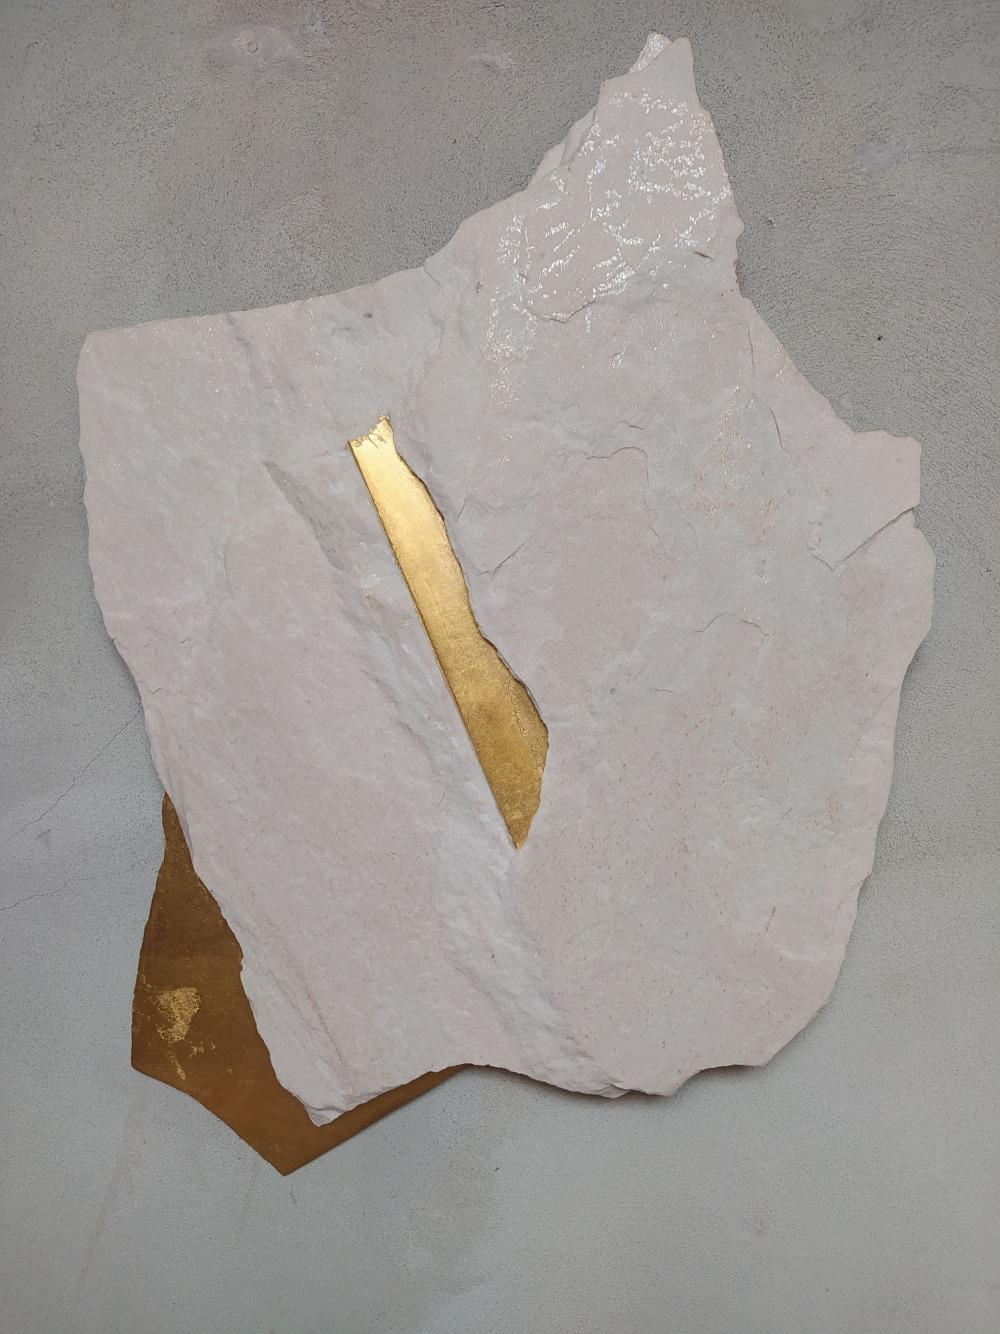 Sezione Aurea A7 is a unique sculpture by contemporary artist Mattia Bosco. This sculpture is made of Palissandro marble and gold leaf, dimensions are 72 × 53.5 × 4 cm (28.3 × 21.1 × 1.6 in). 

The process used by the artist is significantly